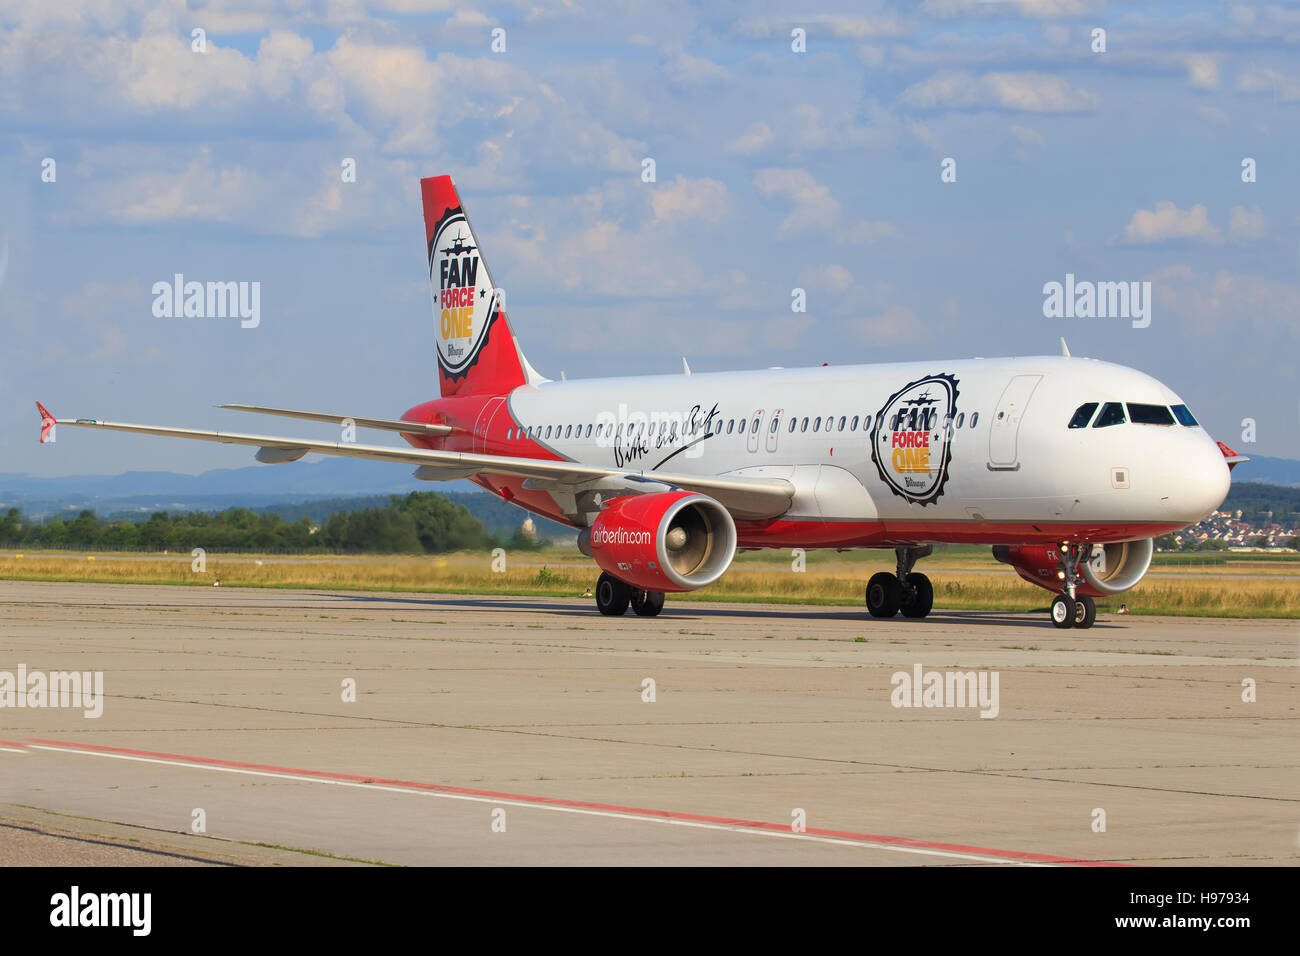 Stuttgart/Germany March 14, 2016:Airbus A320 from Air berlin at Stuttgart Airport. Stock Photo